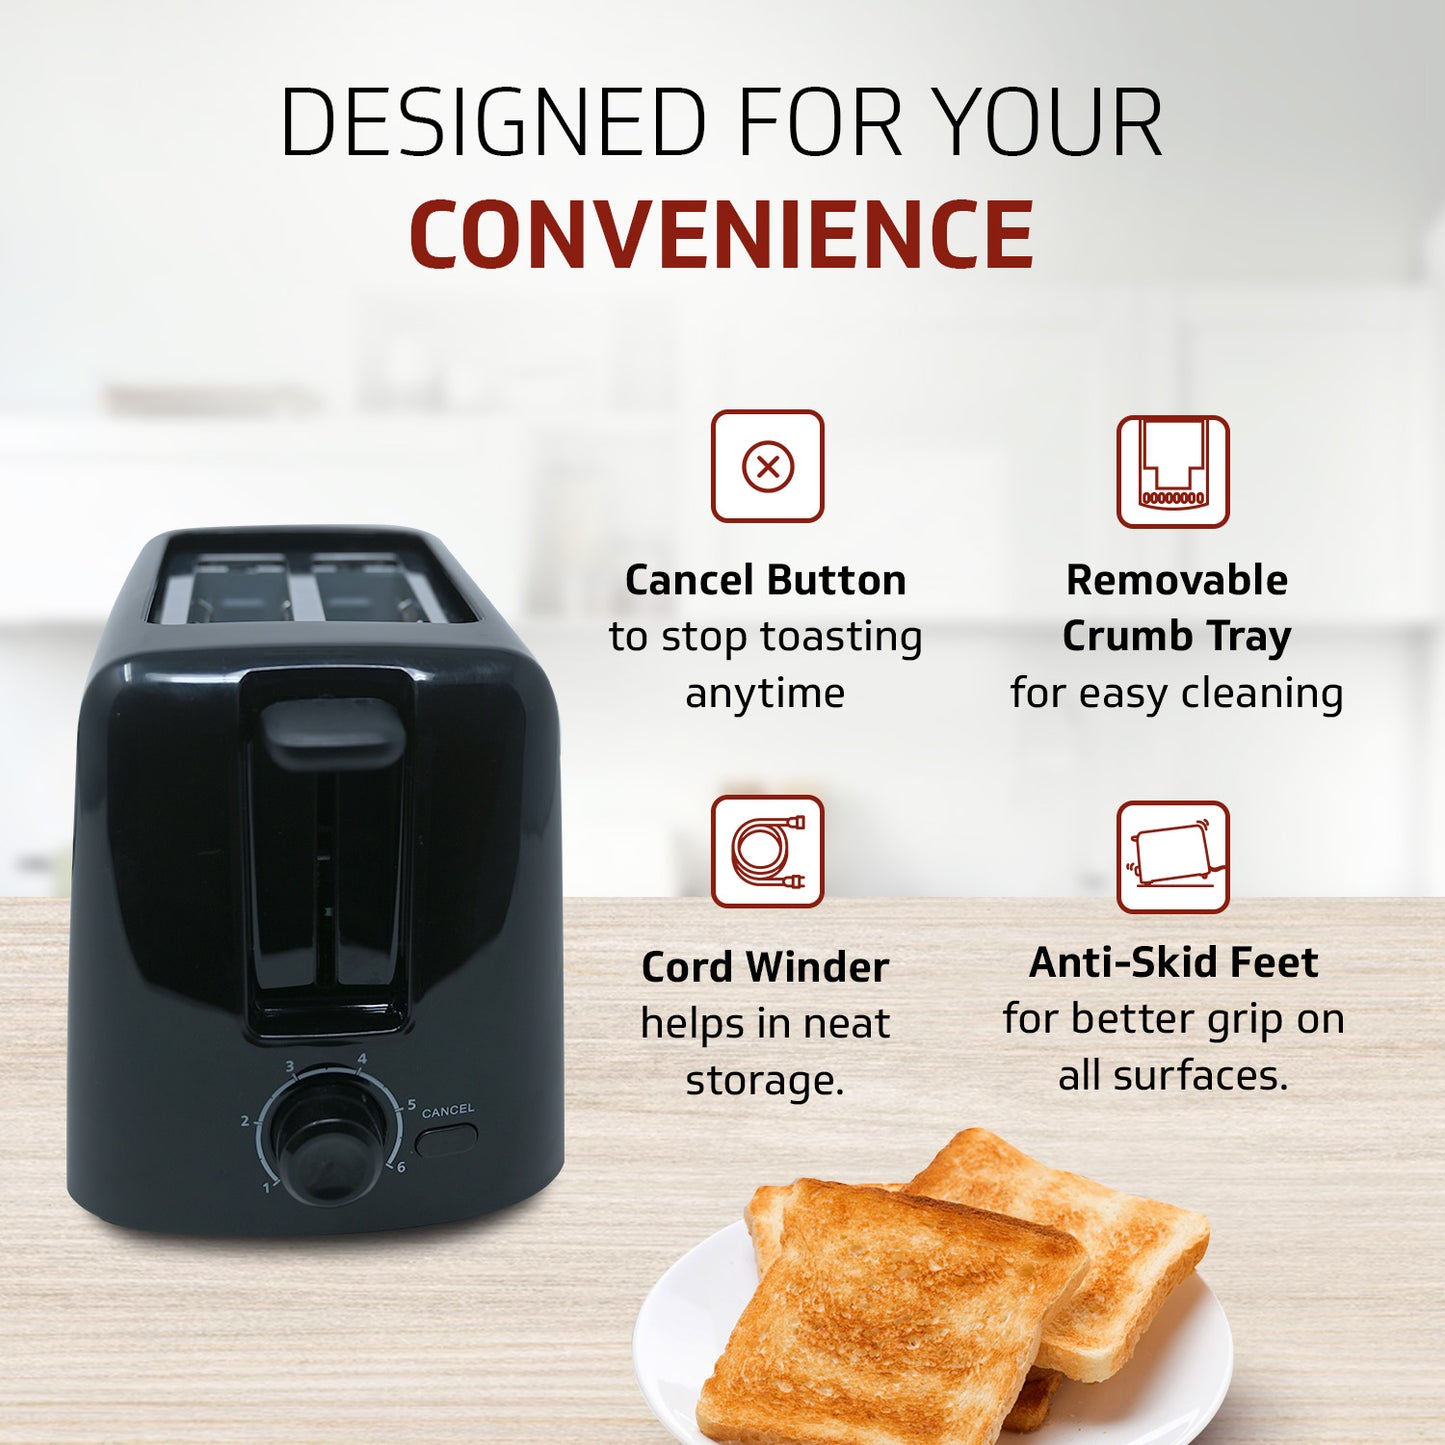 VT200 | 750 Watt Popup Toaster | 6 Browning Levels | Auto Popup Function | Auto Bread Centering